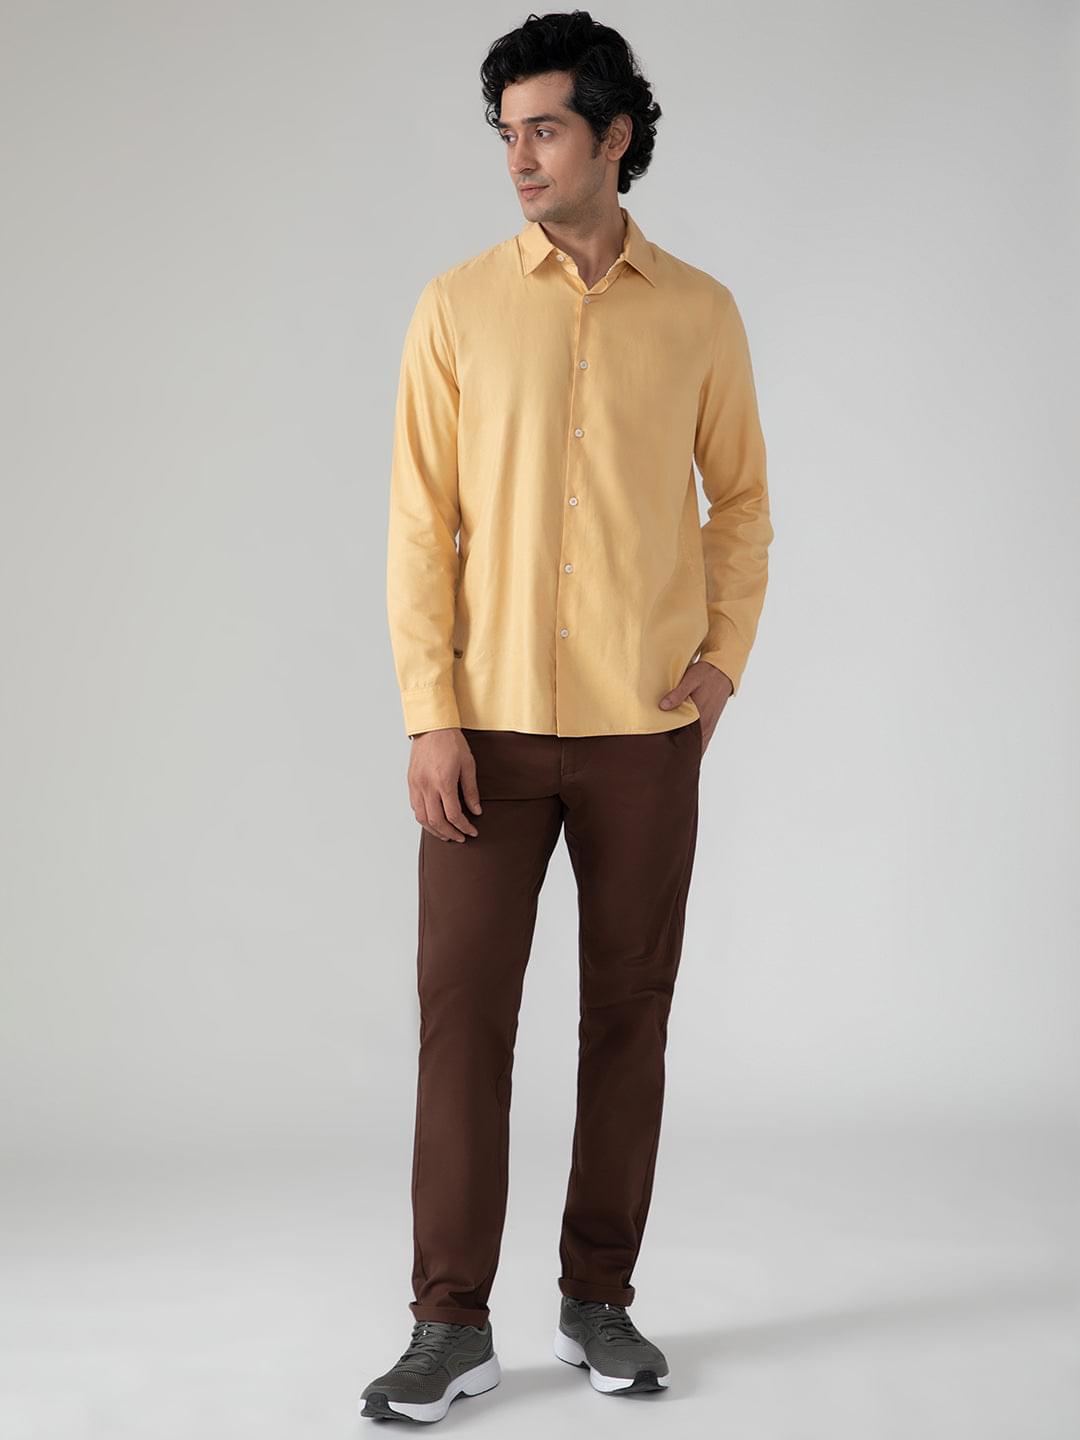 Leightweight Tencel Shirt in Tuscany Yellow- Comfort Fit